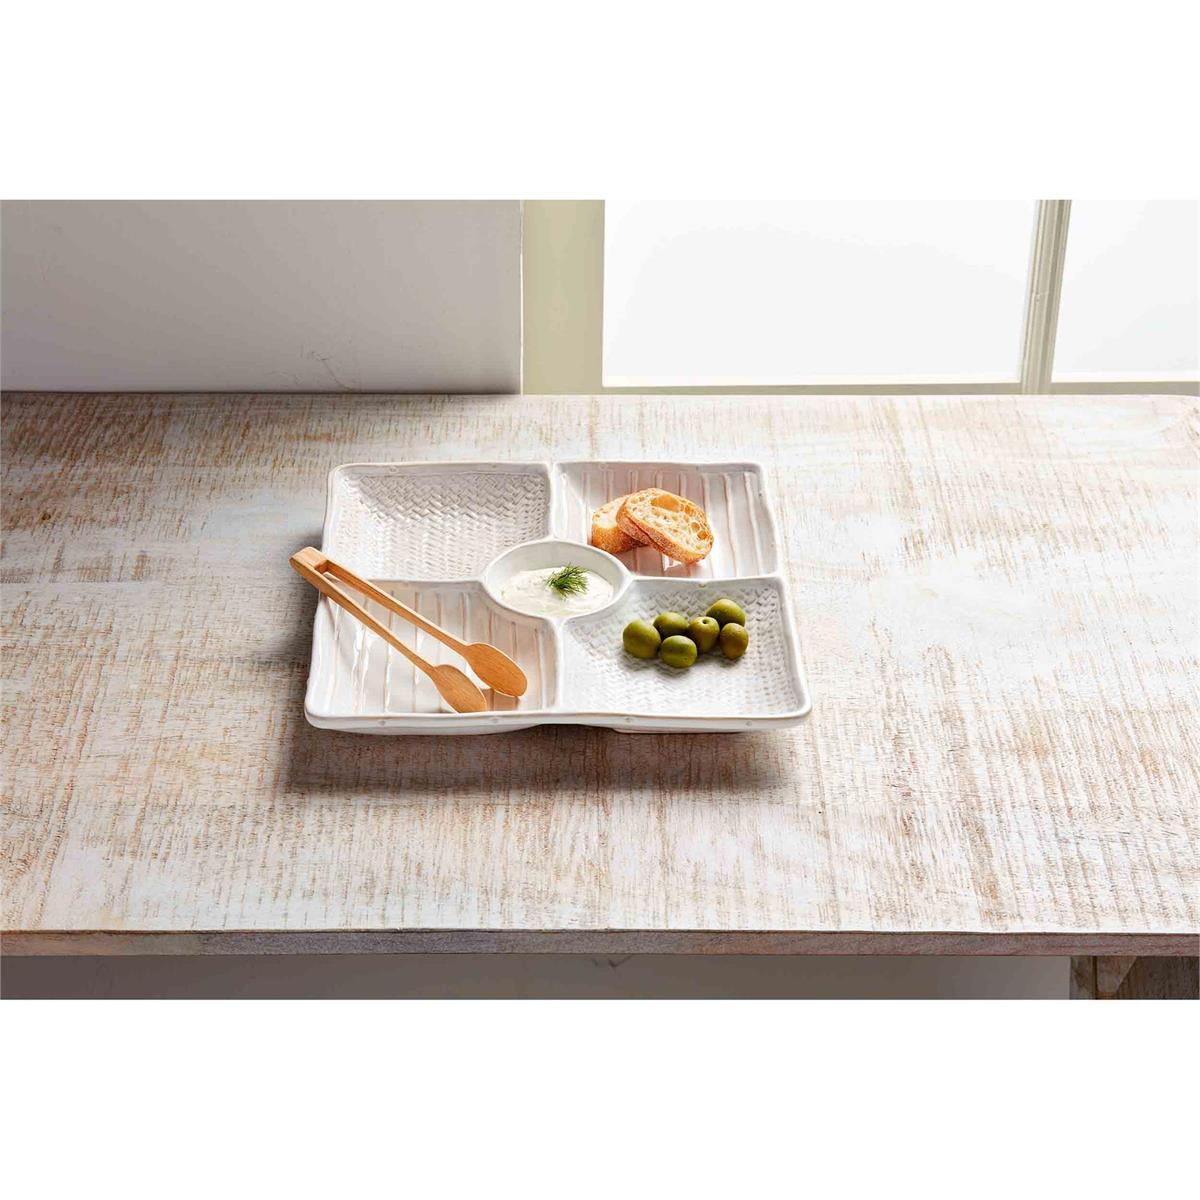 textured sectioned server set displayed on a whitewashed wooden surface next to a window